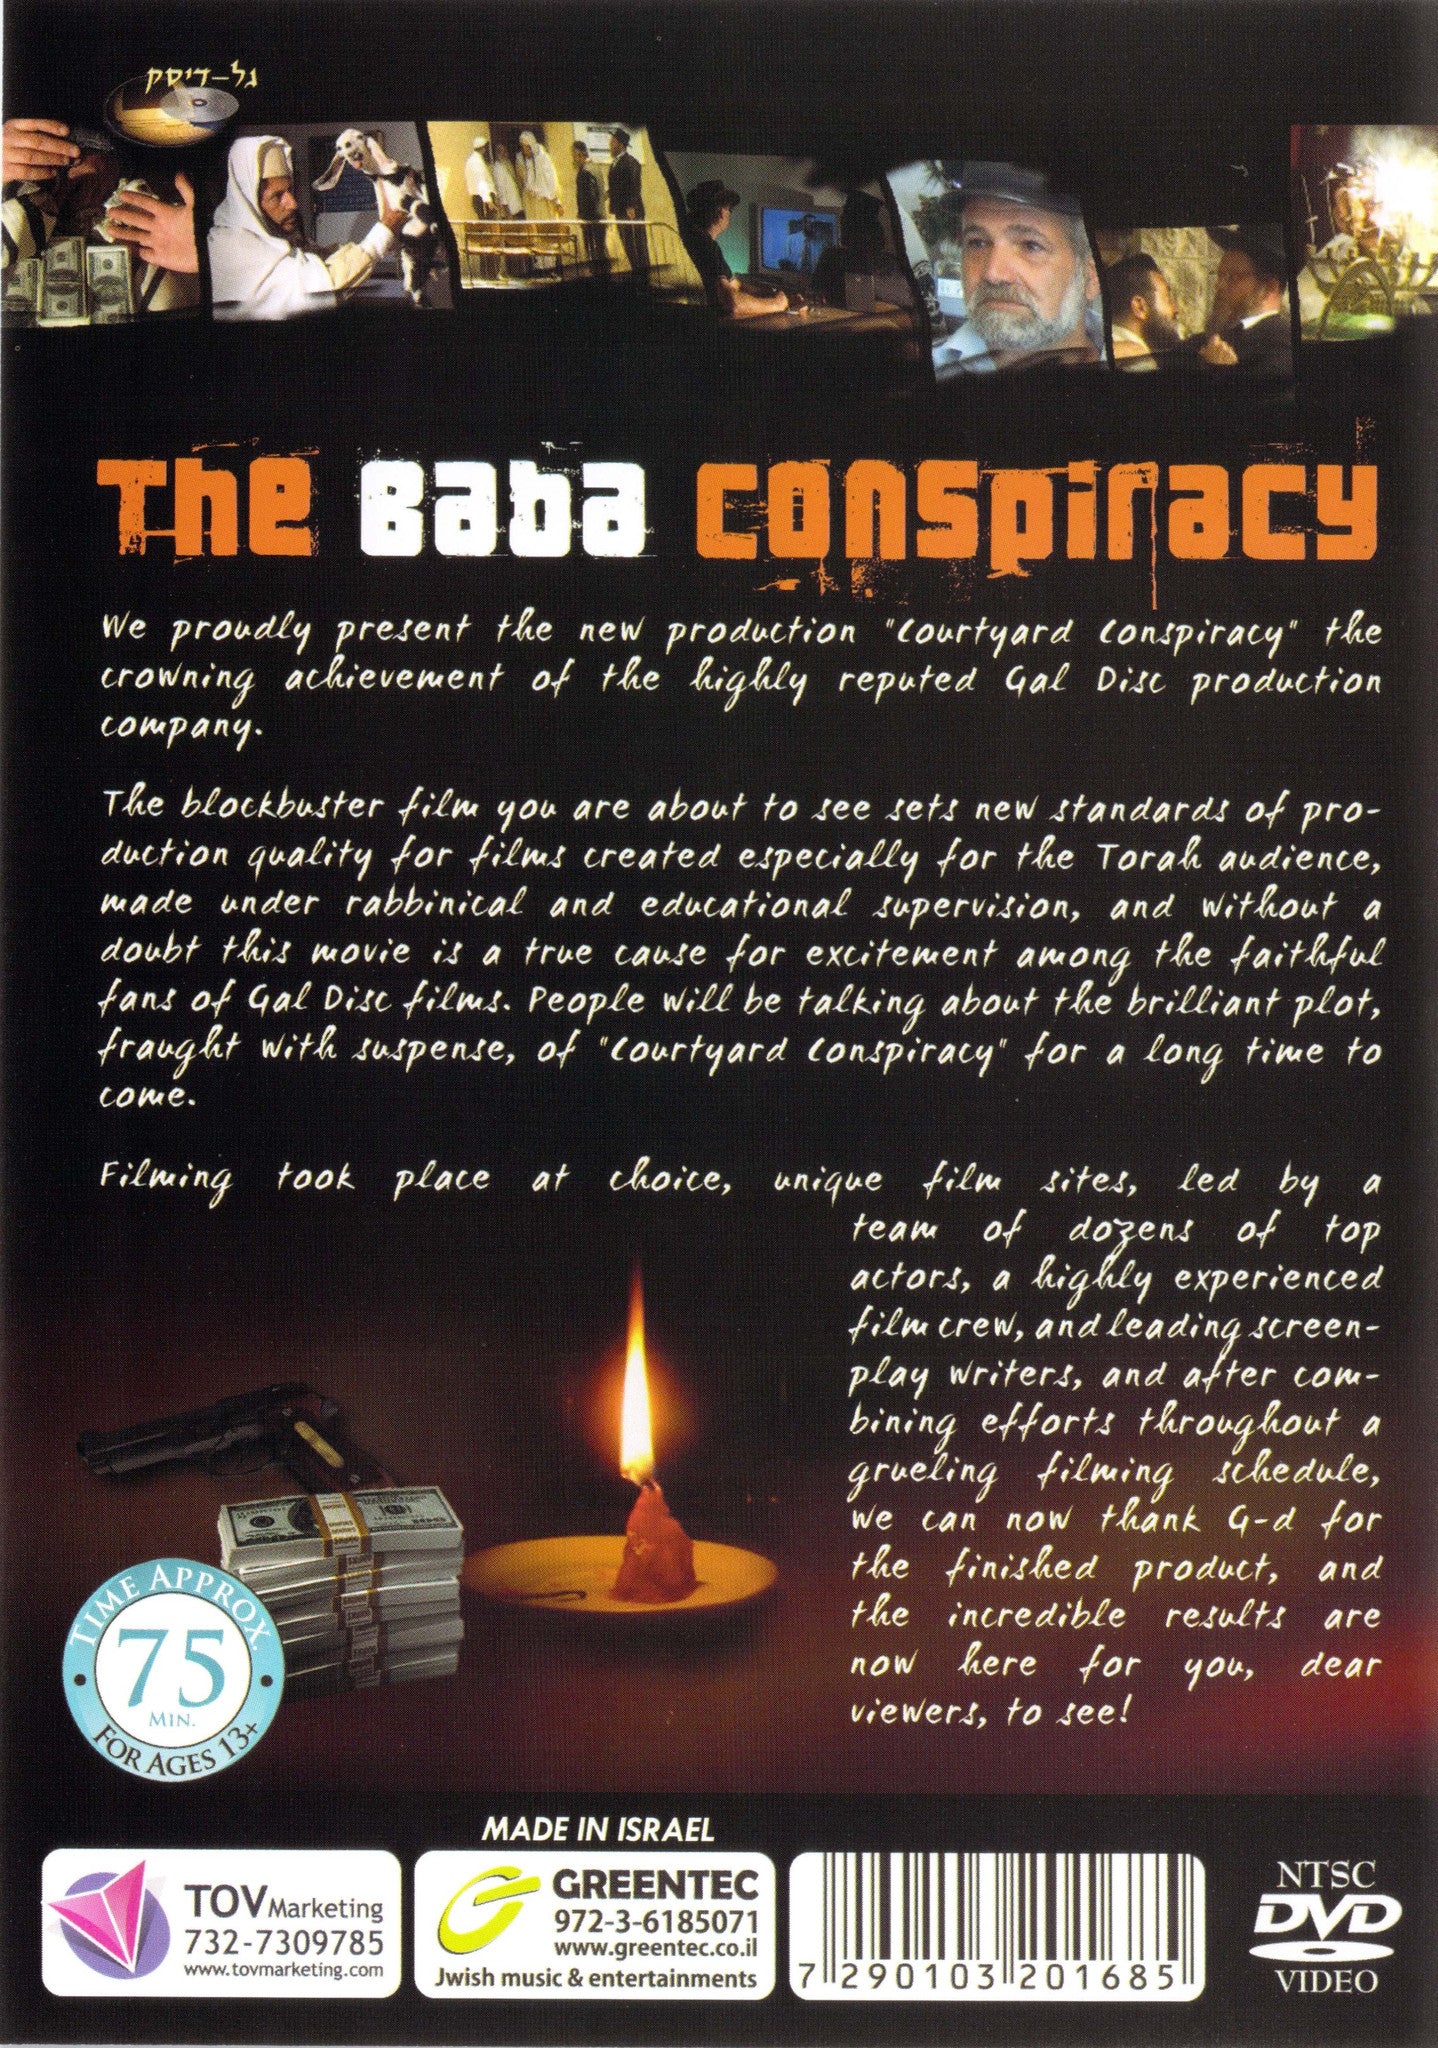 Greentec Movies - The Baba Conspiracy